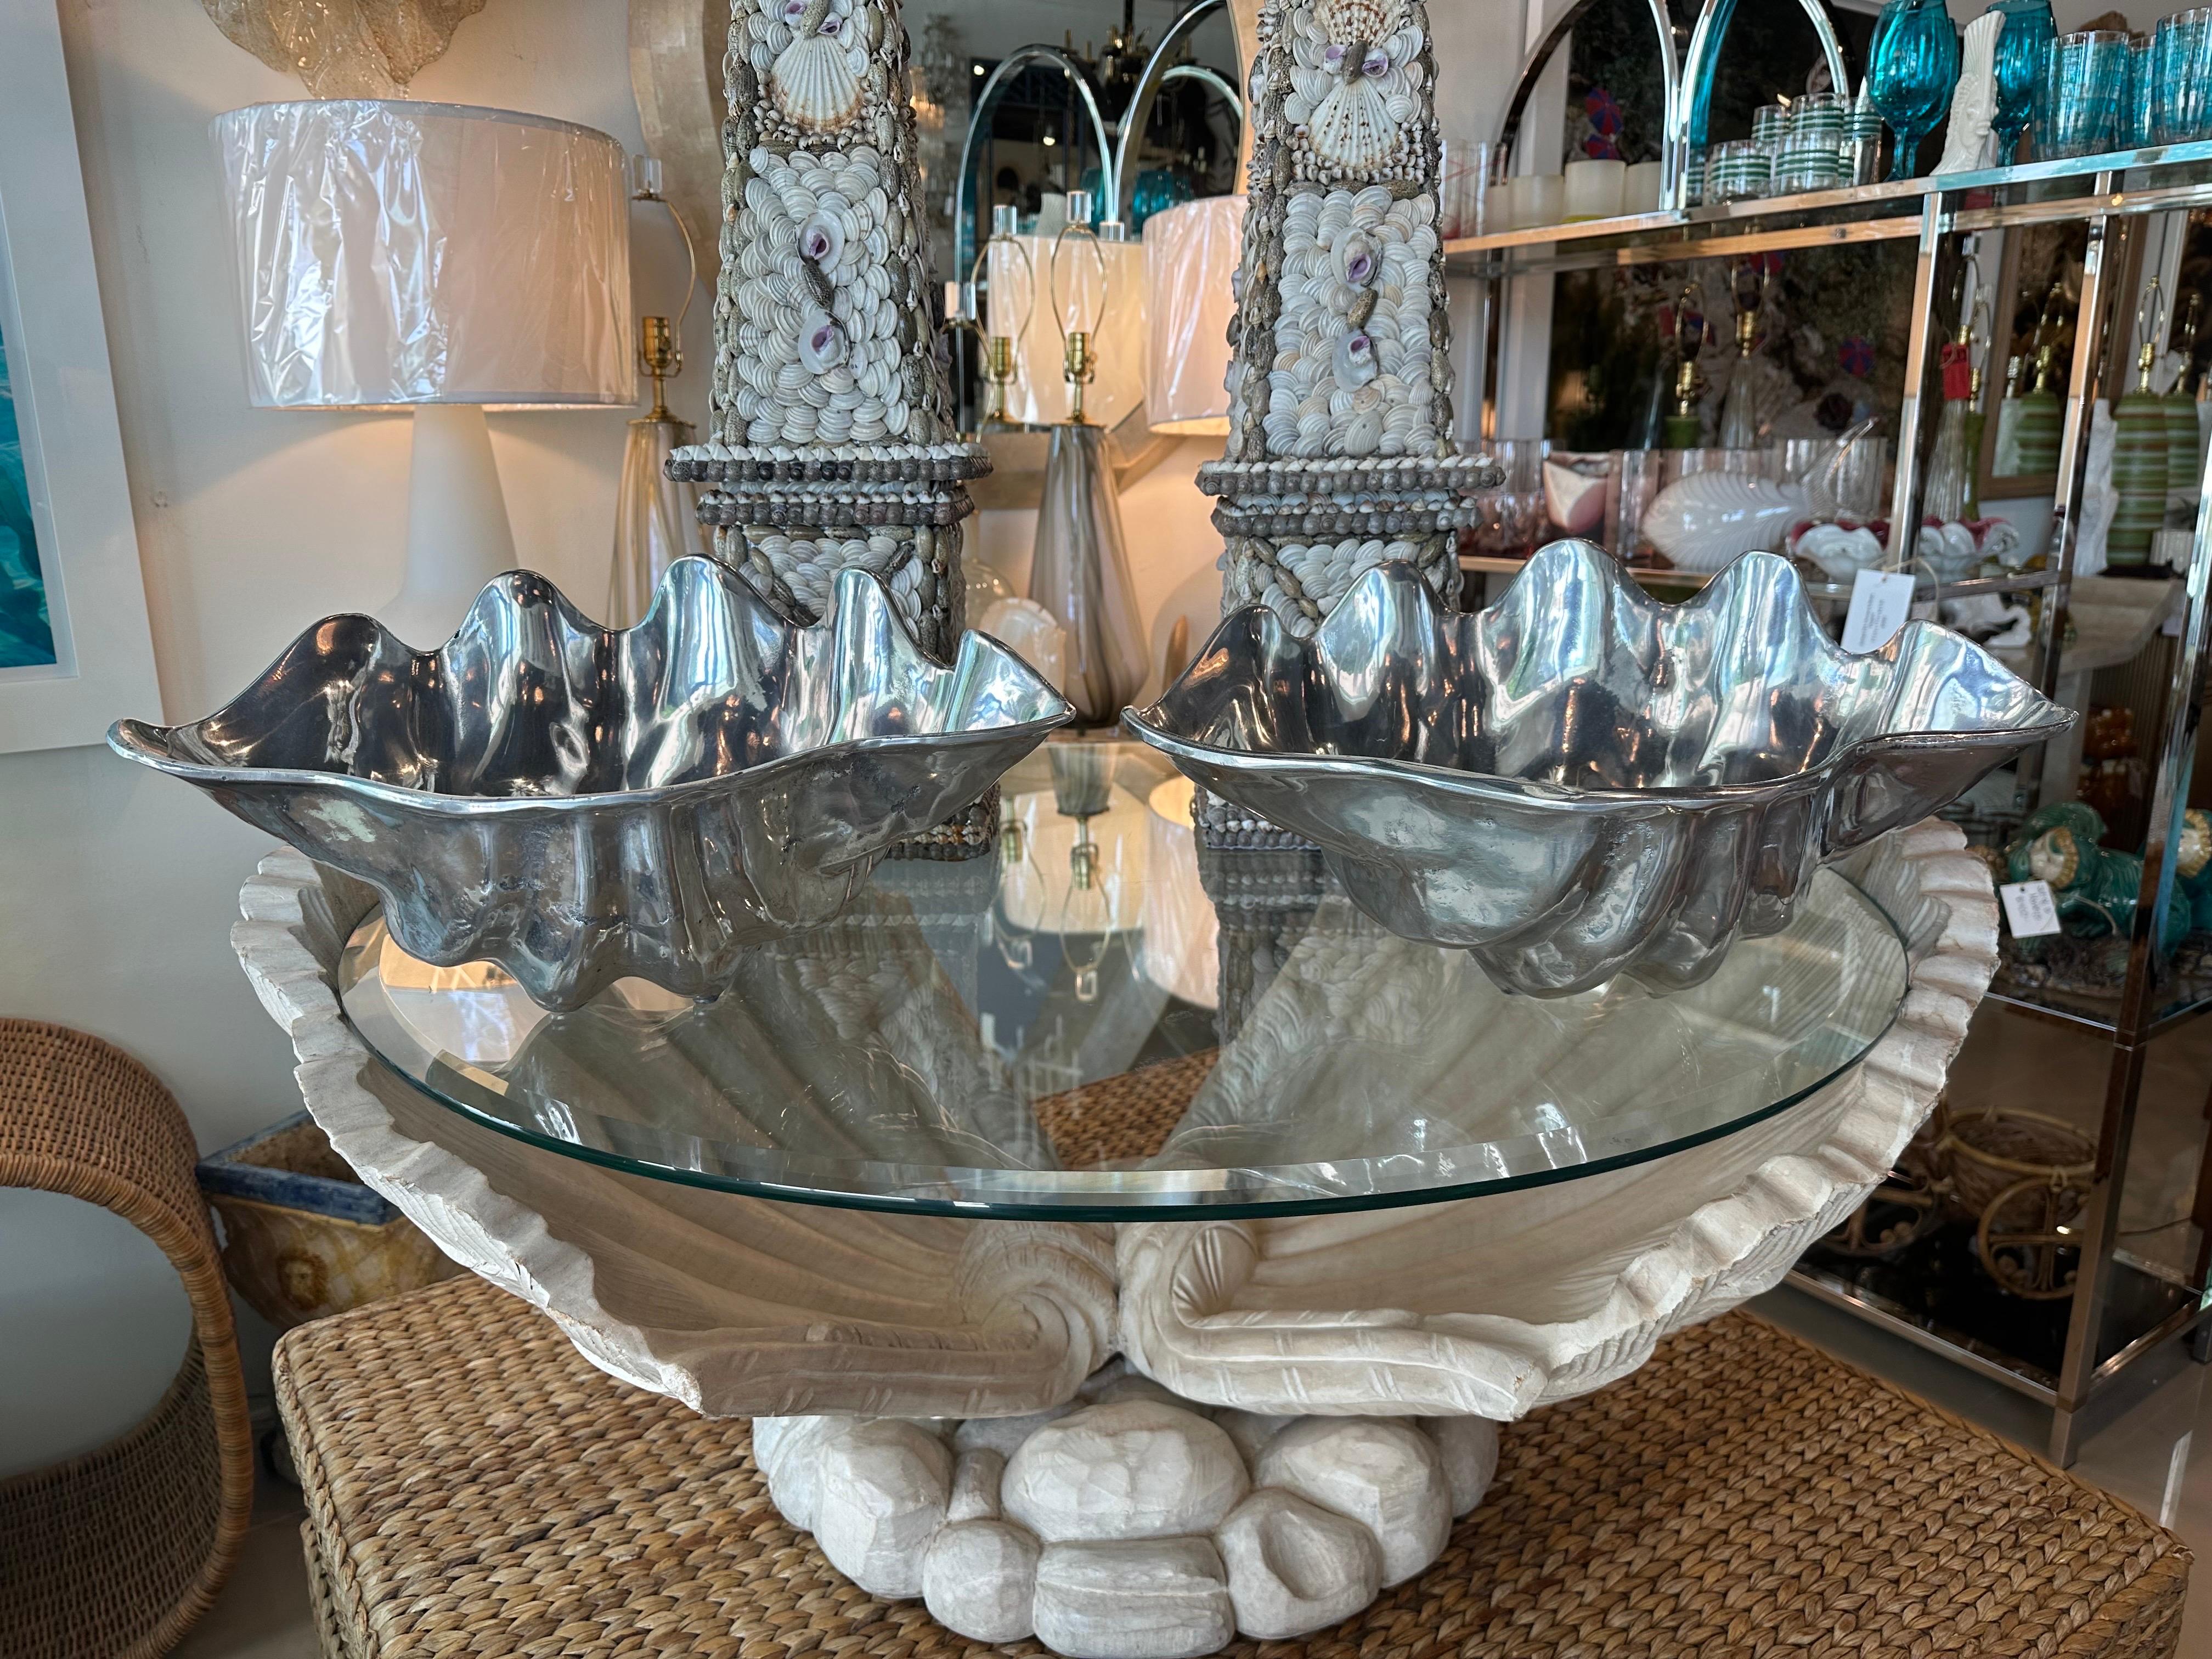  Pair Silver Metal Scalloped Clam Shell Vessel Bowl Planter Arthur Court Style In Good Condition For Sale In West Palm Beach, FL